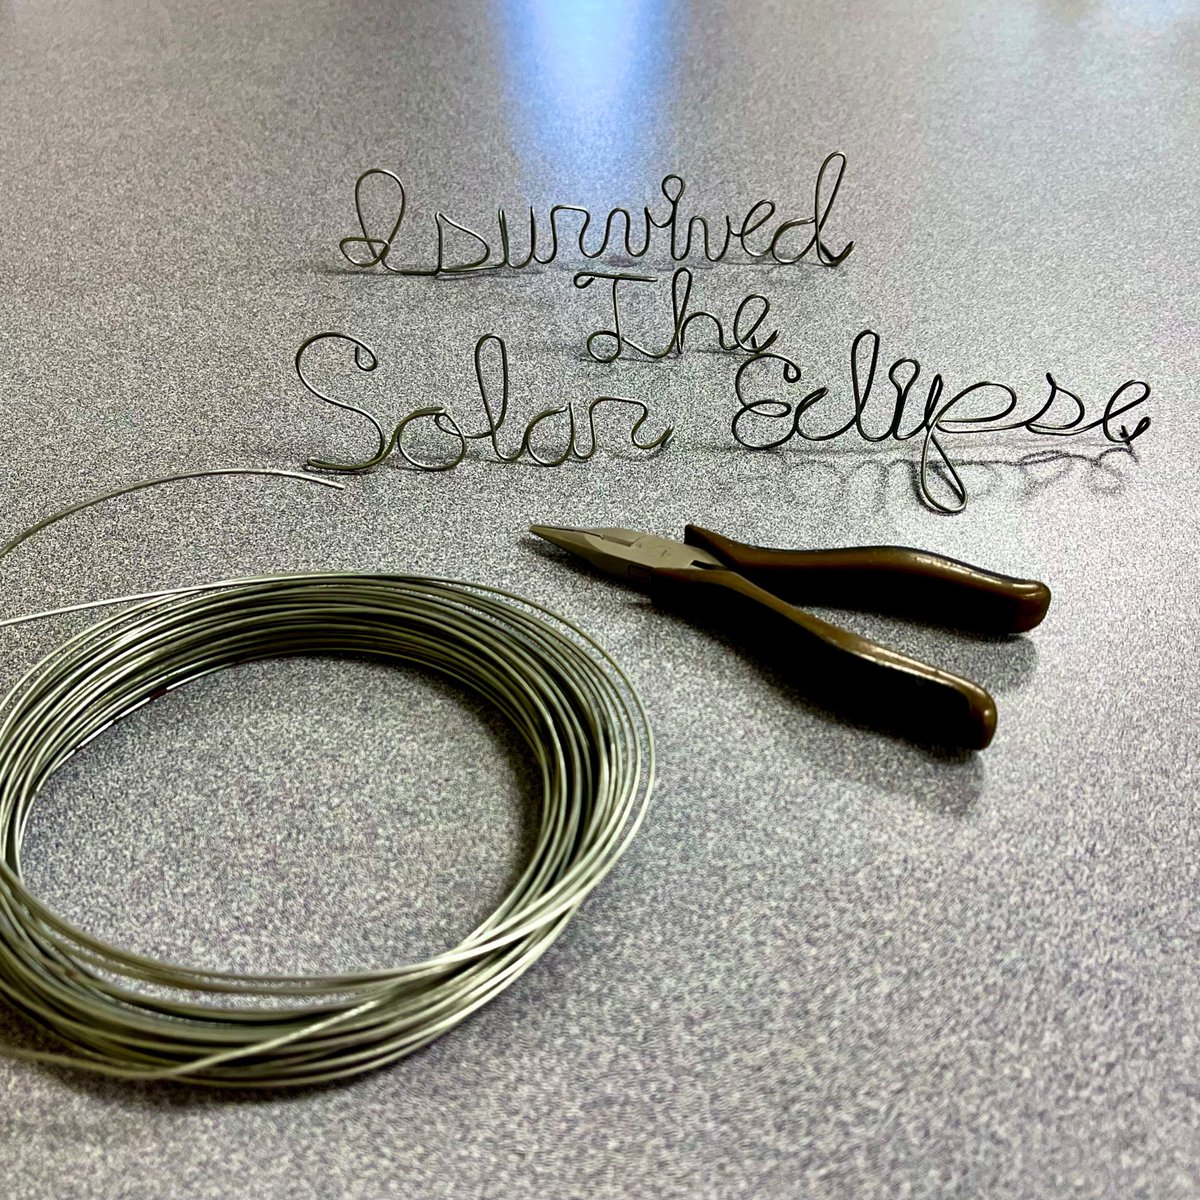 #TheWireNameOfTheDay #ISurvivedTheSolarEclipse on April 8, 2024.
#EclipseSolar2024 
by Dave Maskin  #TheAmazingWireMan 
davemaskin.wixsite.com/theamazingwire…
3D #wirenames created in front of your guests at your #privateparty #corporateevent or inside your #tradeshowbooth